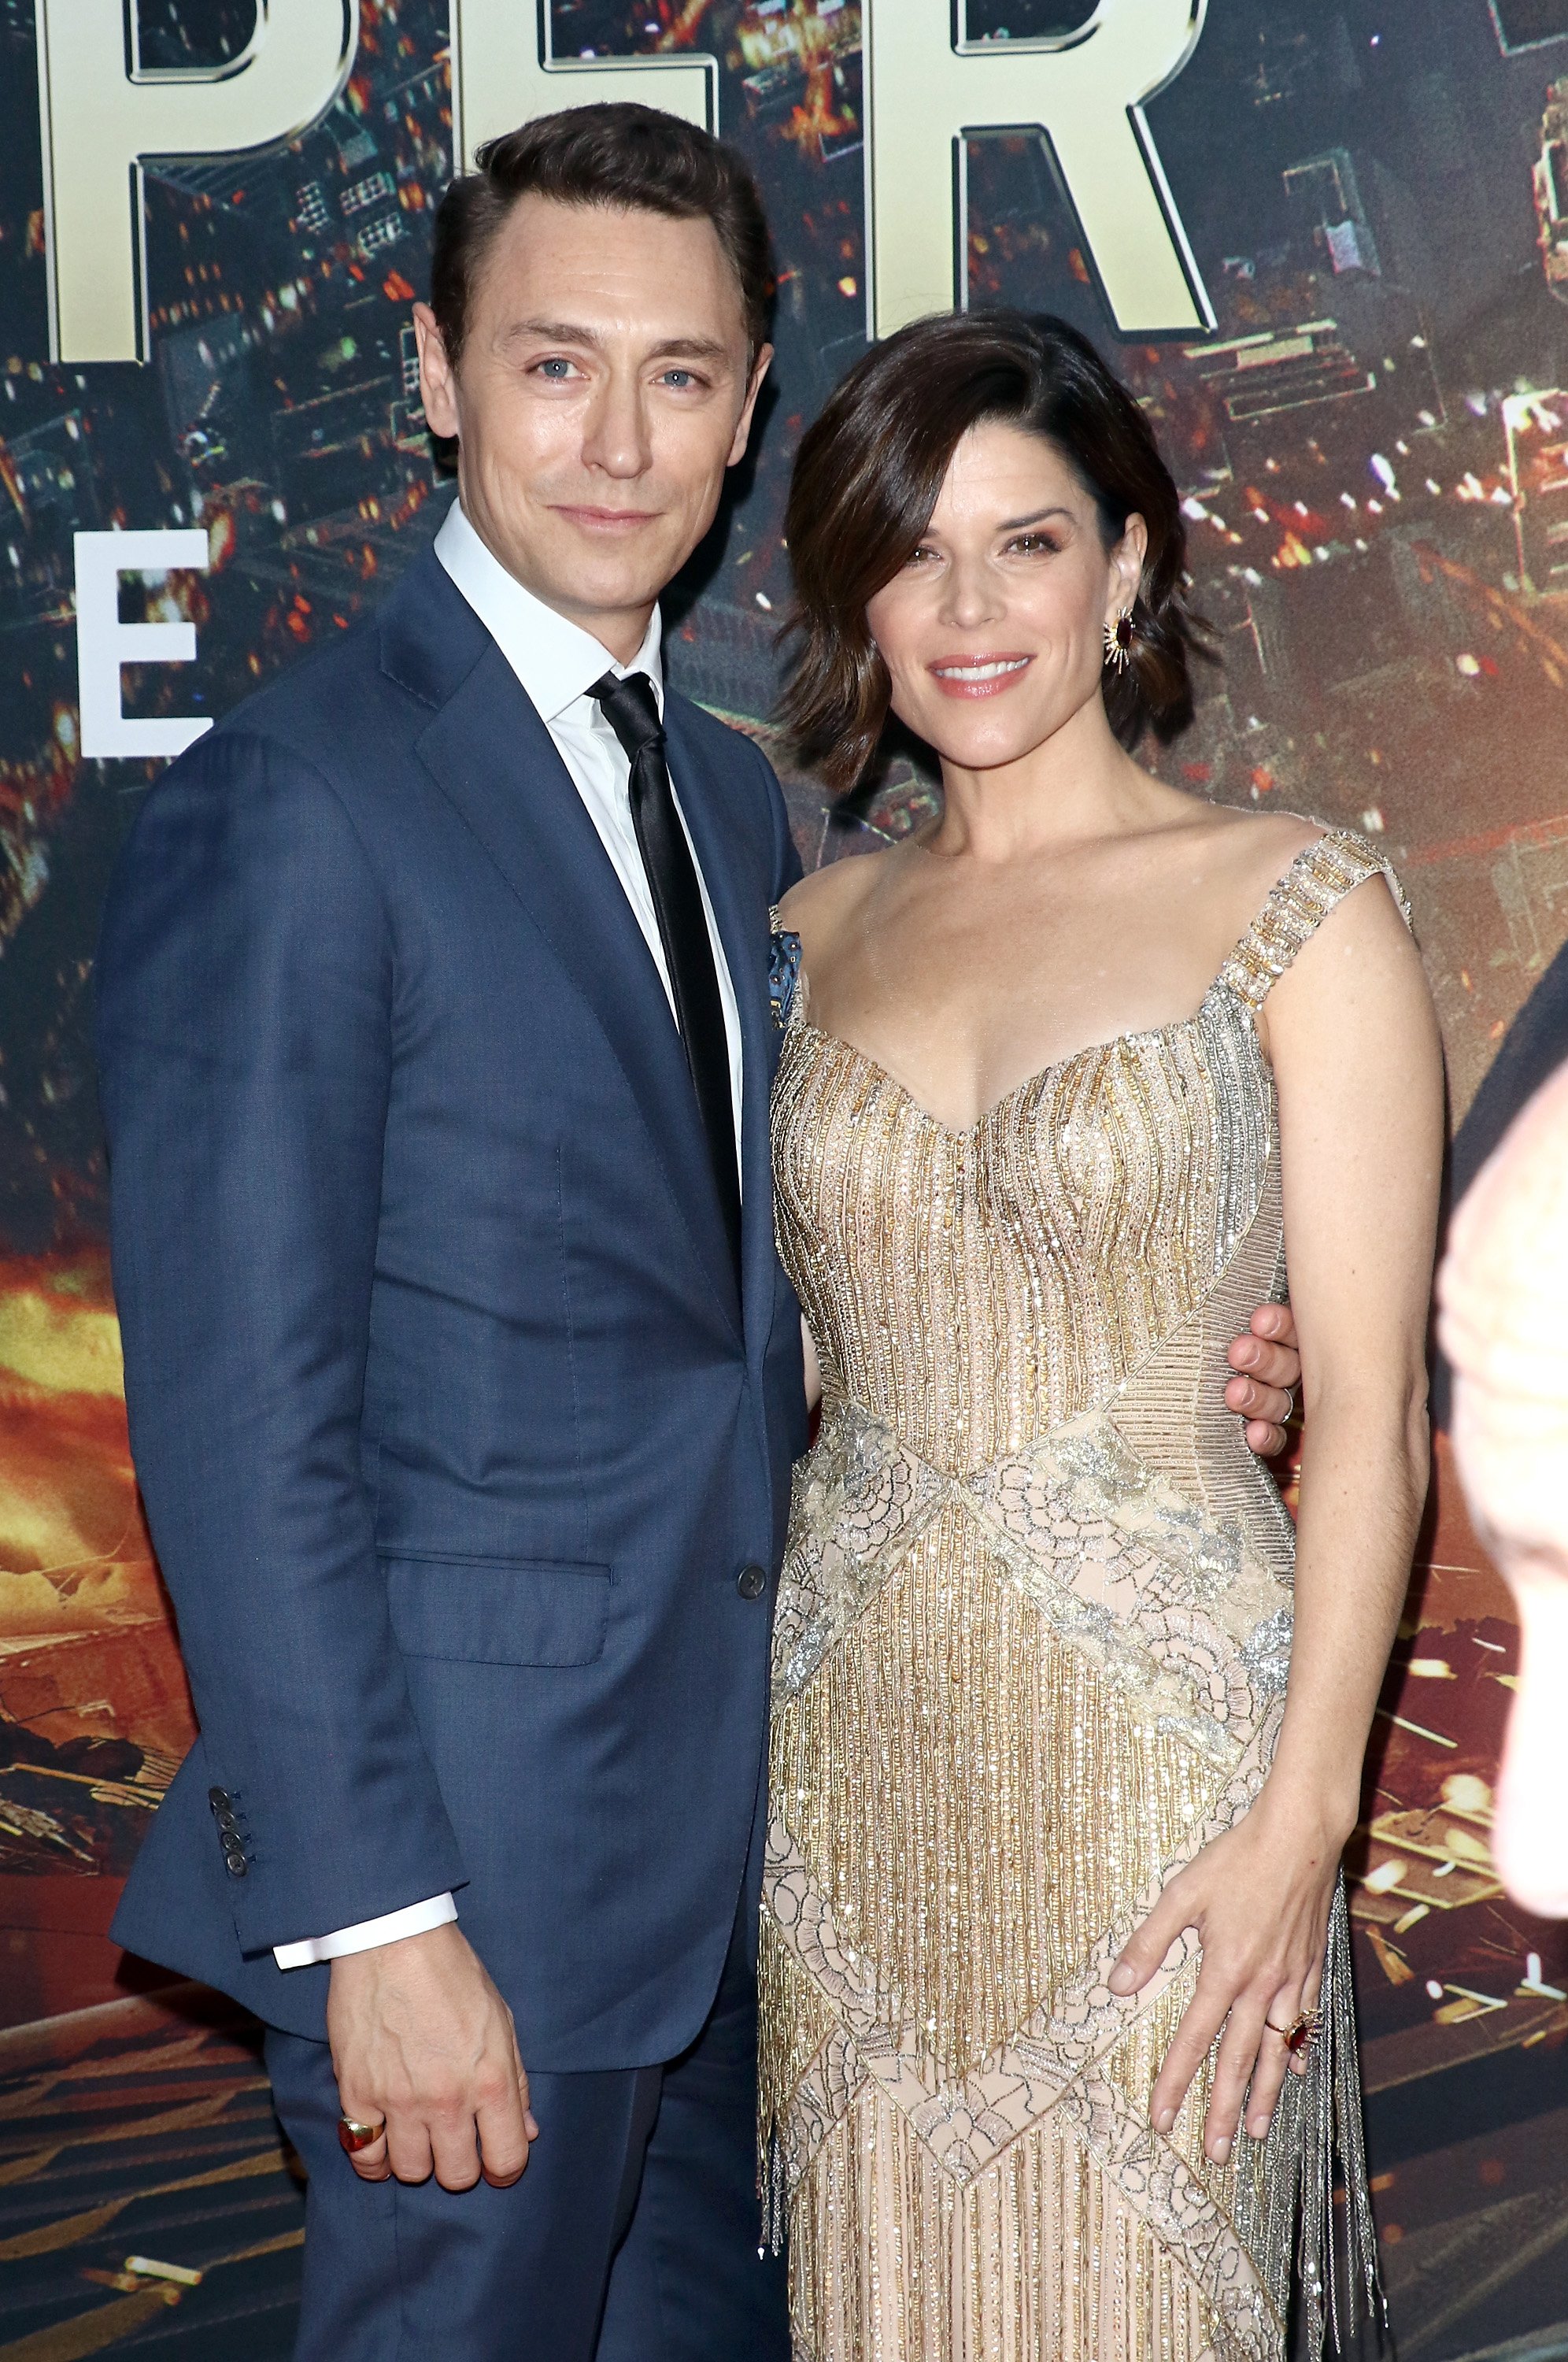 JJ Feild and Neve Campbell attend the "Skyscraper" premiere at AMC Loews Lincoln Square on July 10, 2018, in New York City. | Source: Getty Images